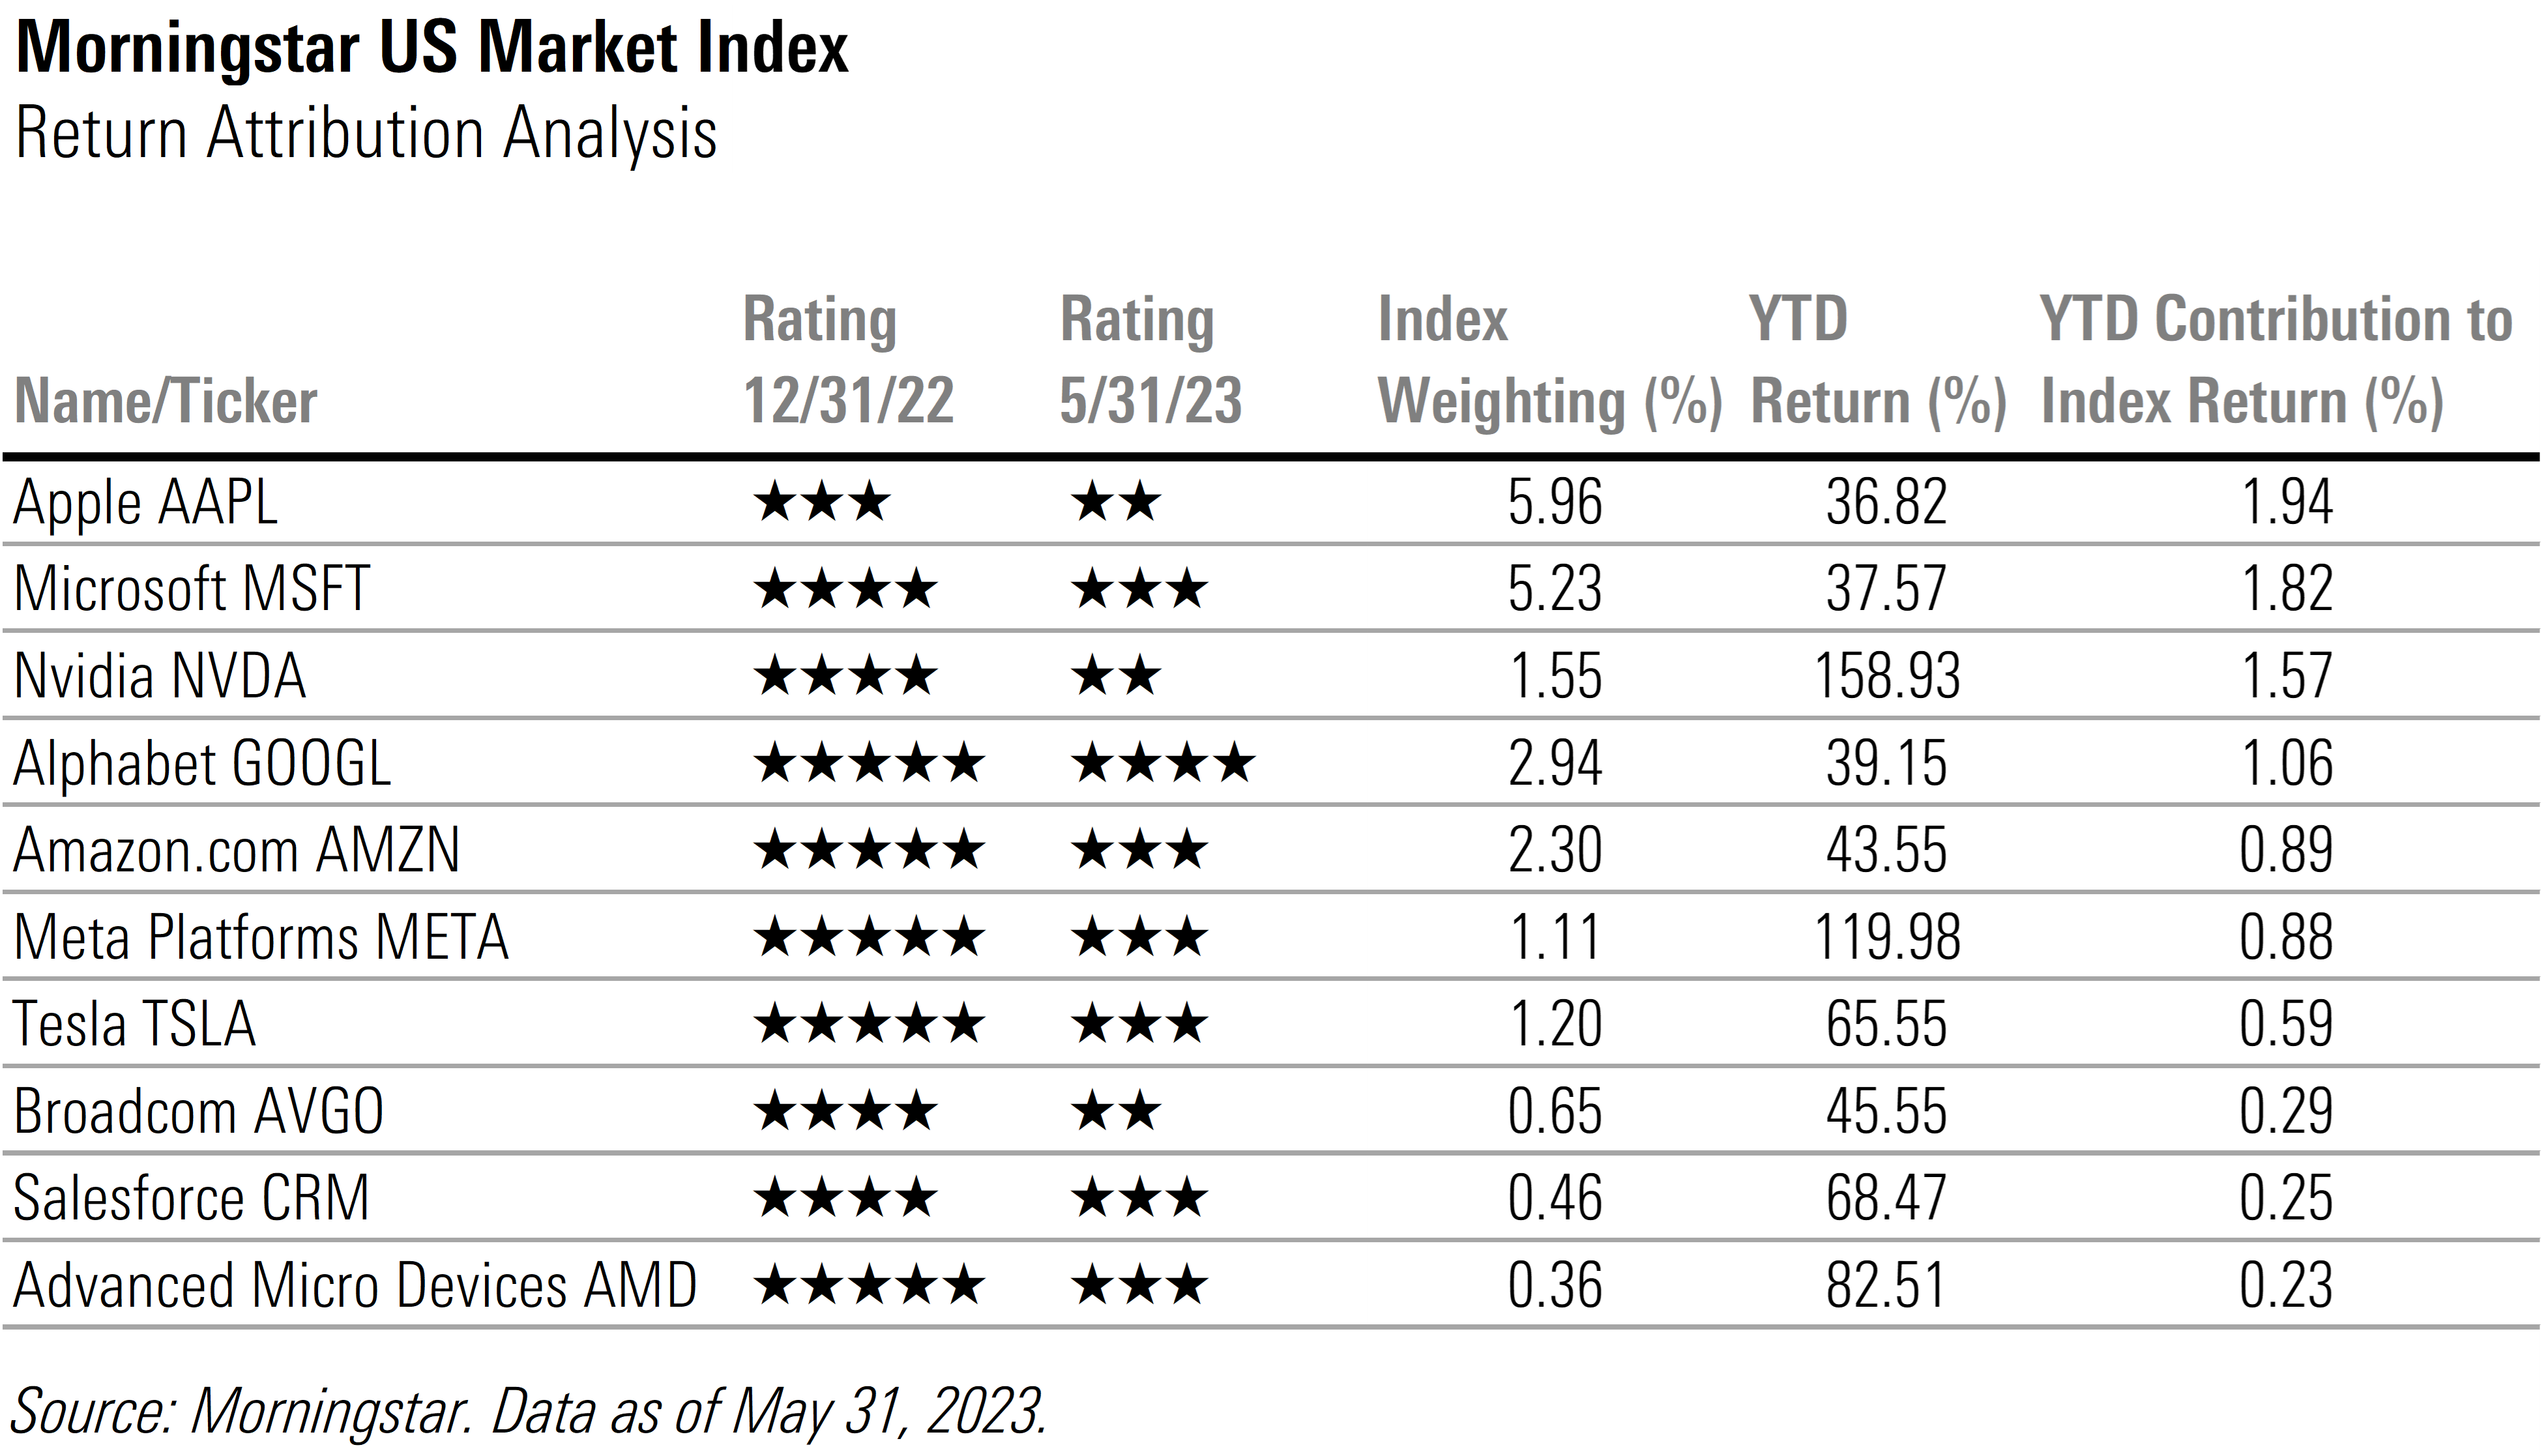 Table that contains the top 10 highest return attributions to the Morningstar US Market Index